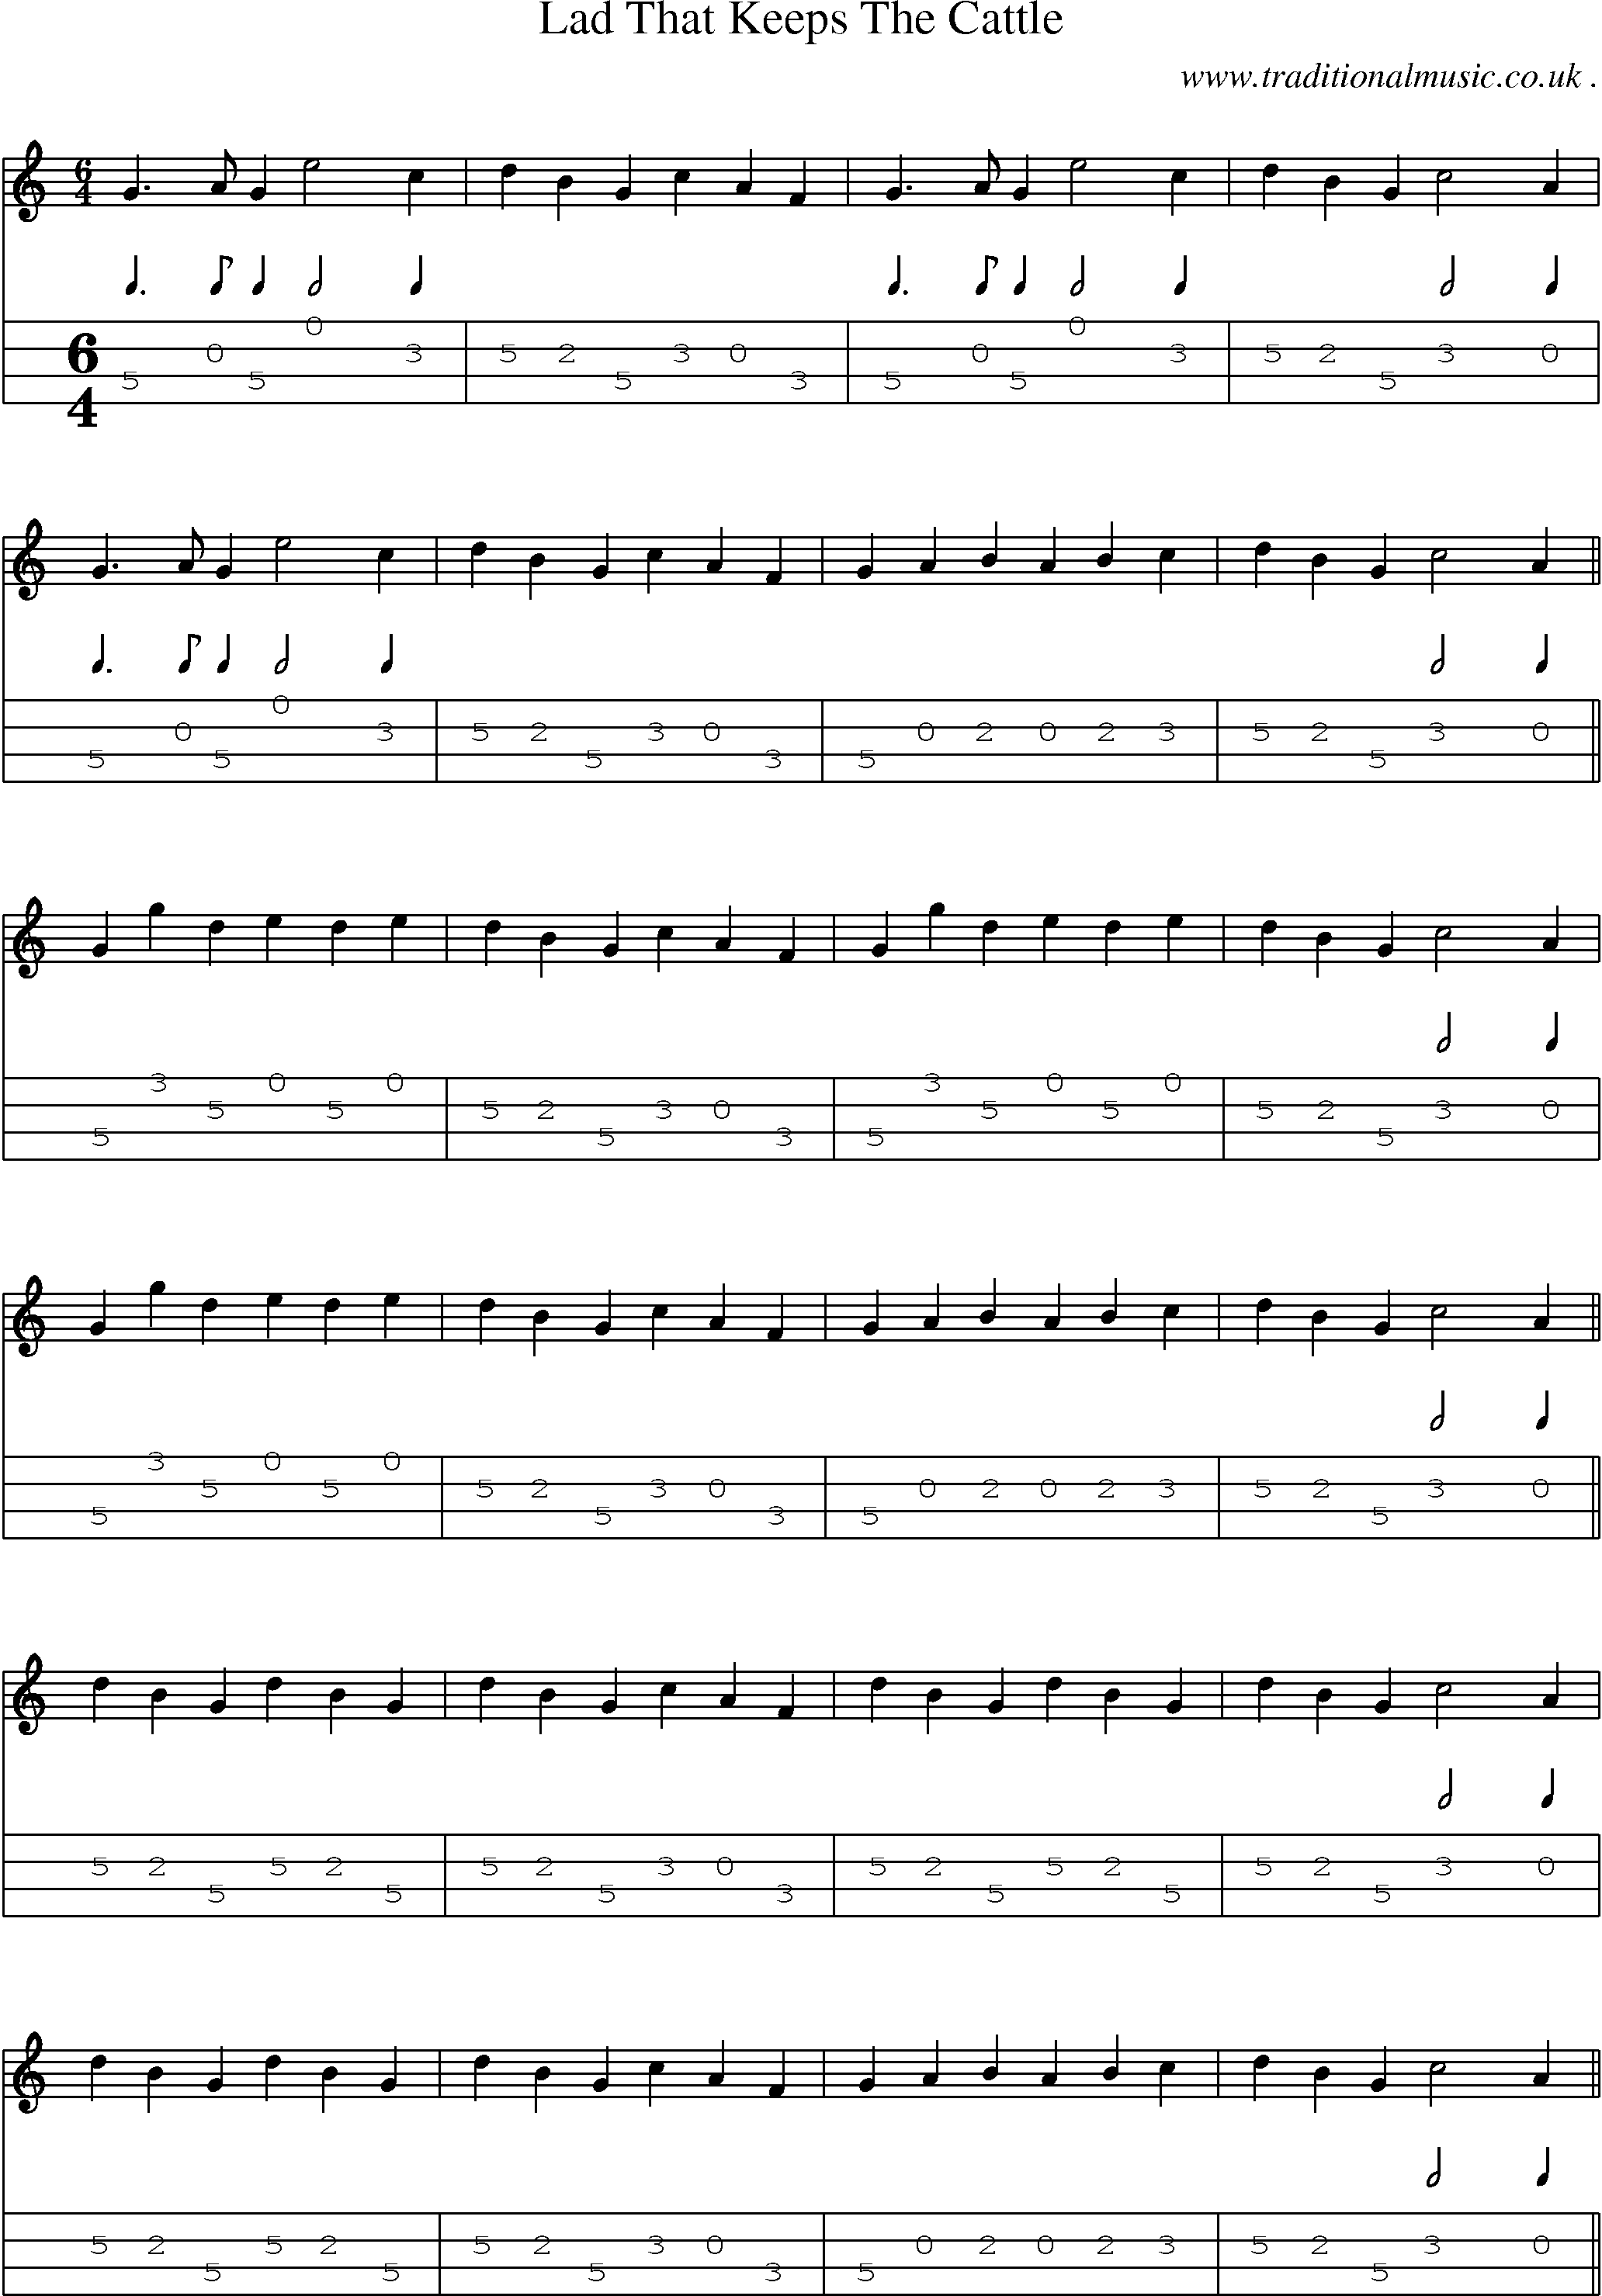 Sheet-Music and Mandolin Tabs for Lad That Keeps The Cattle